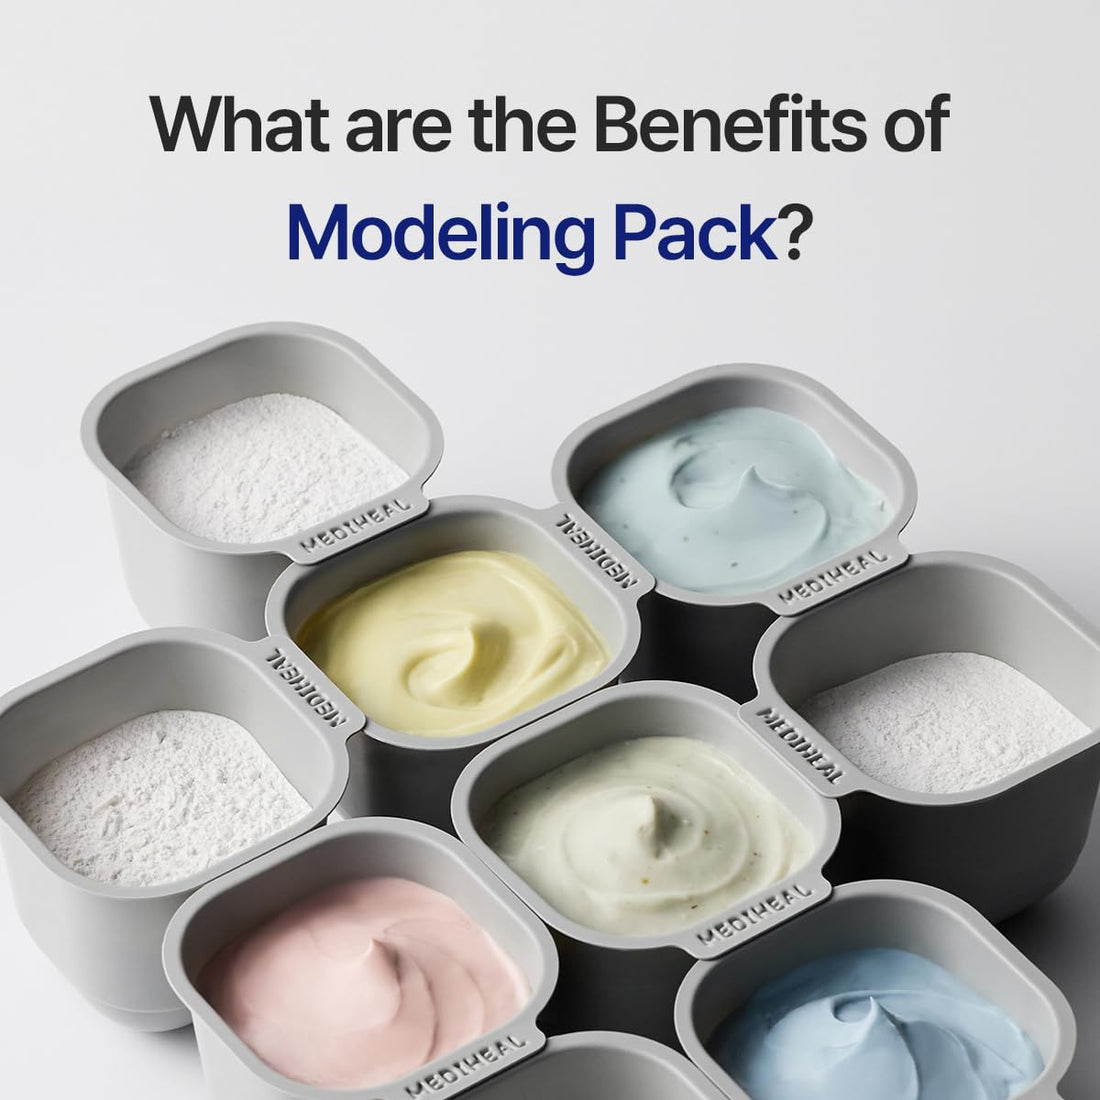 Derma Modeling Pack (Collagen) - Filling Elasticity for Glow Skin - Easy DIY Home Spa Kits, Hydrating Icy Jelly Mask for Skin Refreshment